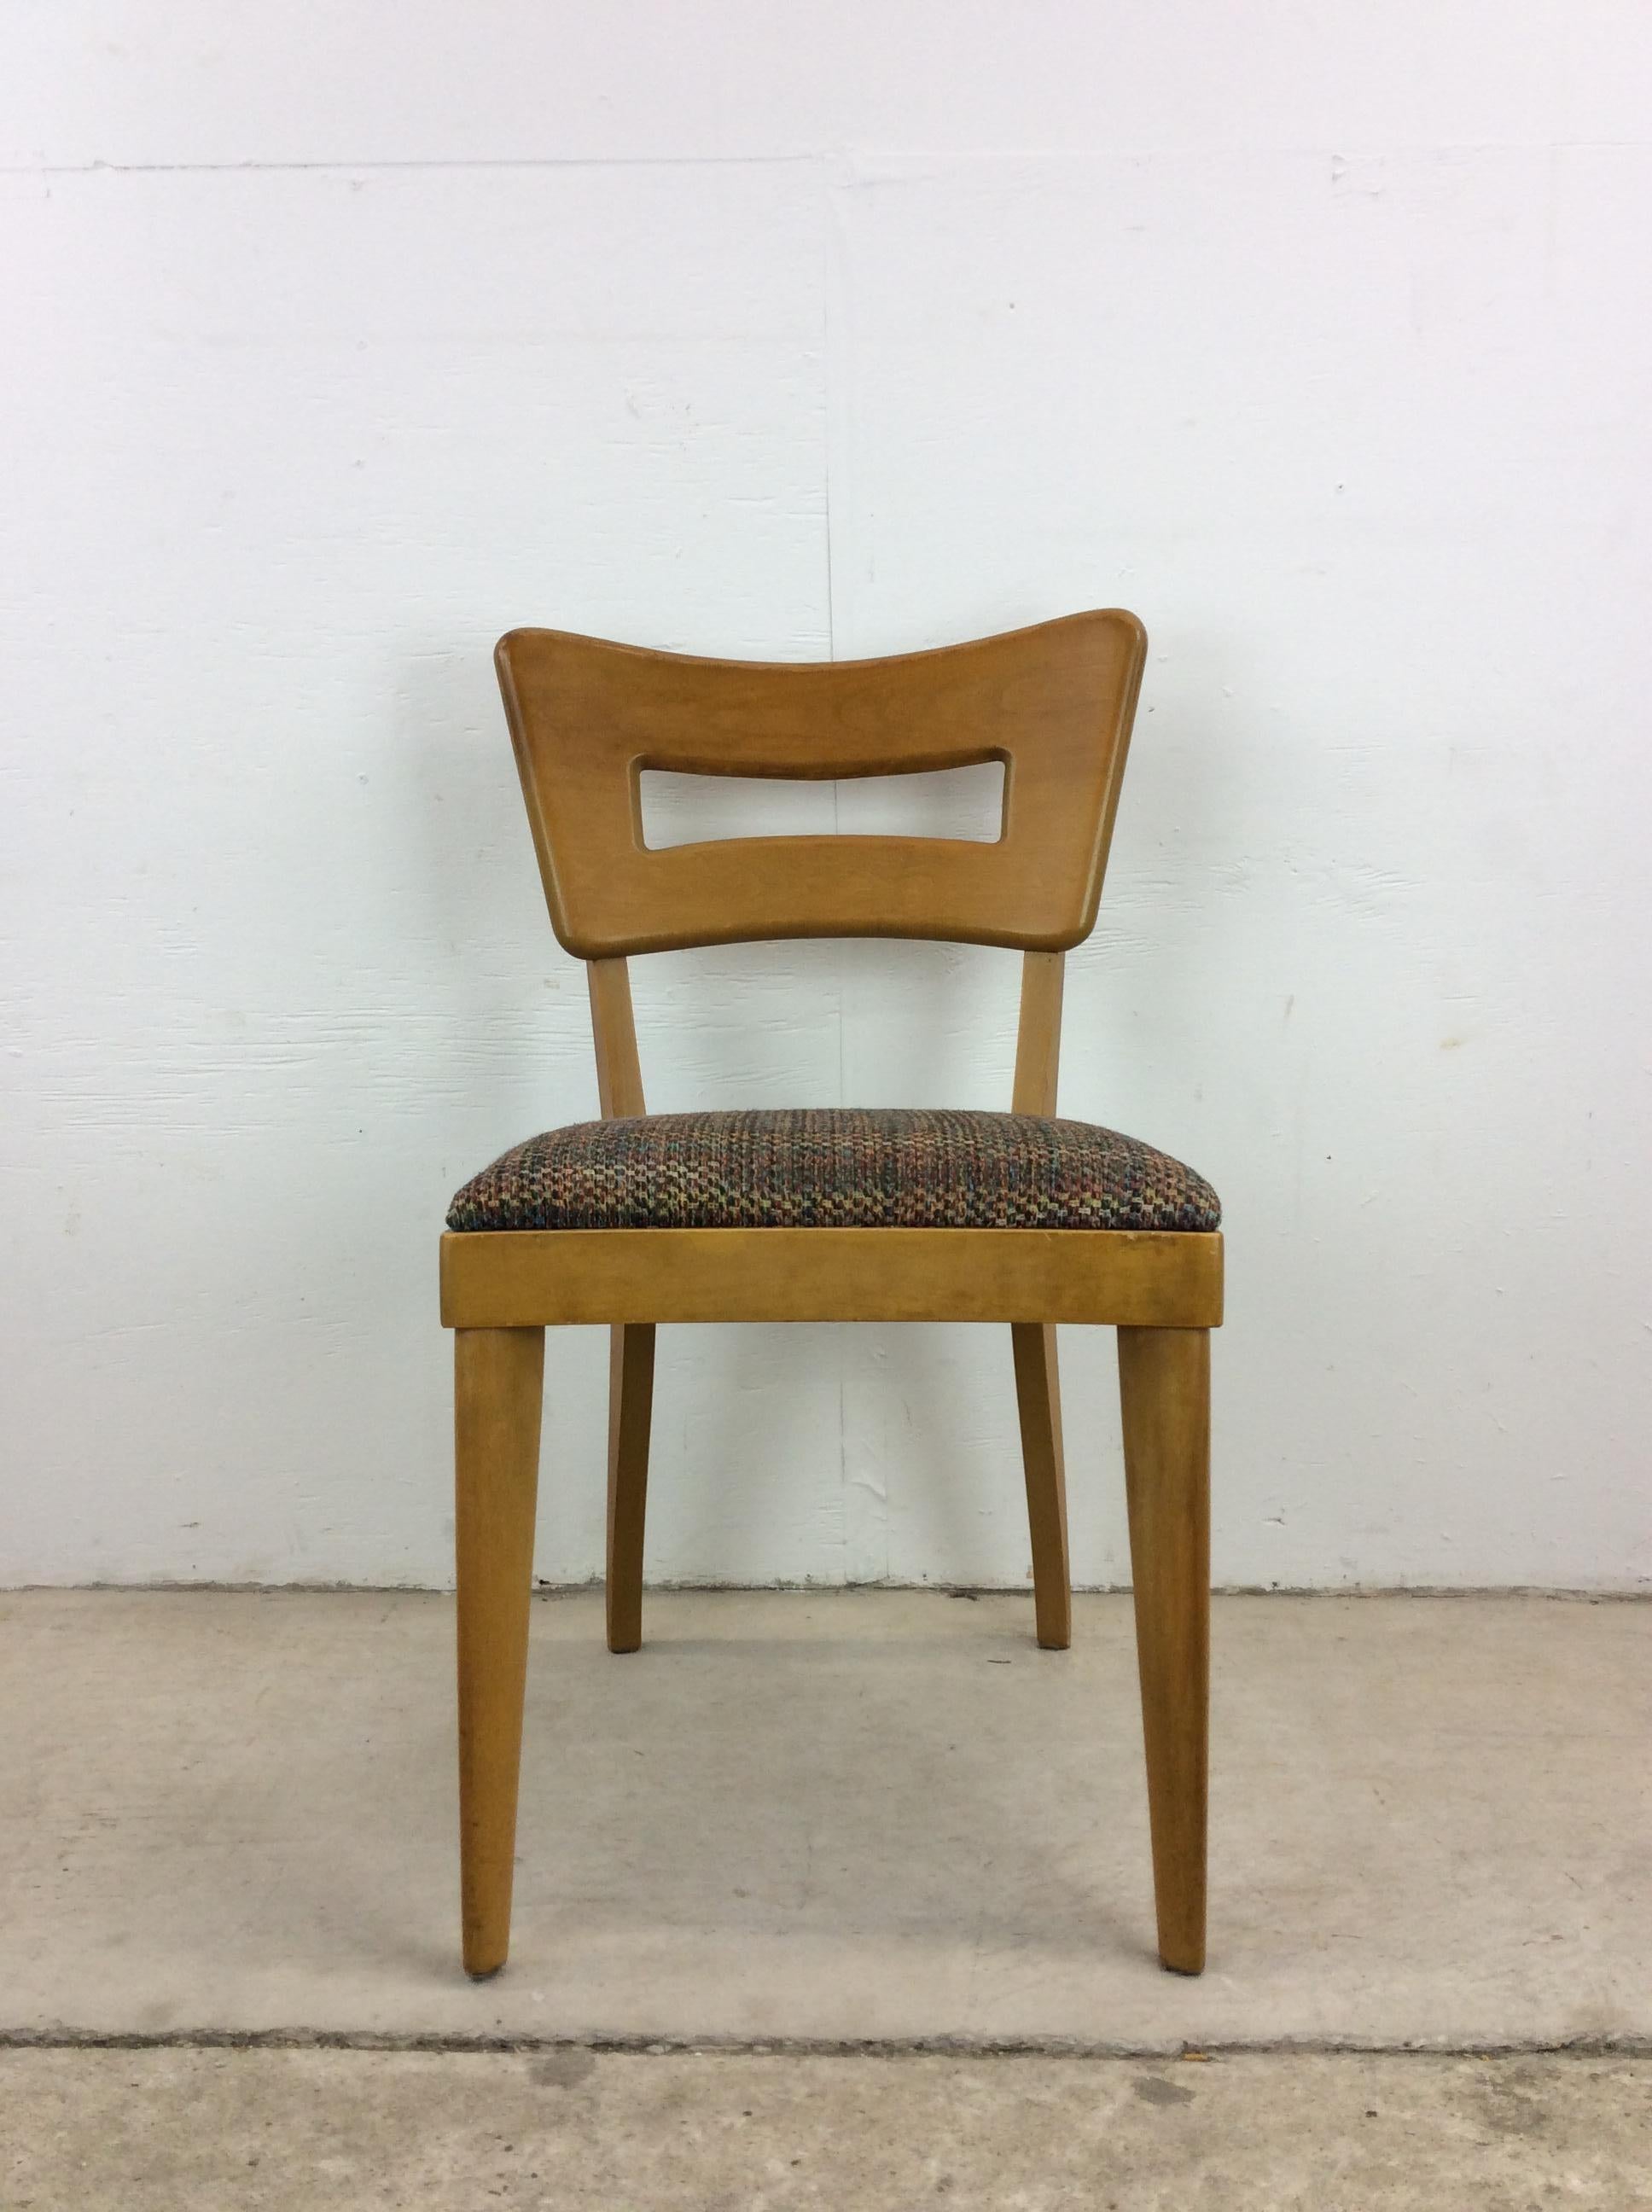 This mid century modern side chair by Heywood Wakefield features hardwood construction, original champagne finish, vintage upholstery and tall tapered legs.

Please check out our other Heywood Wakefield listings as well.

Dimensions: 18w 18d 33.5h